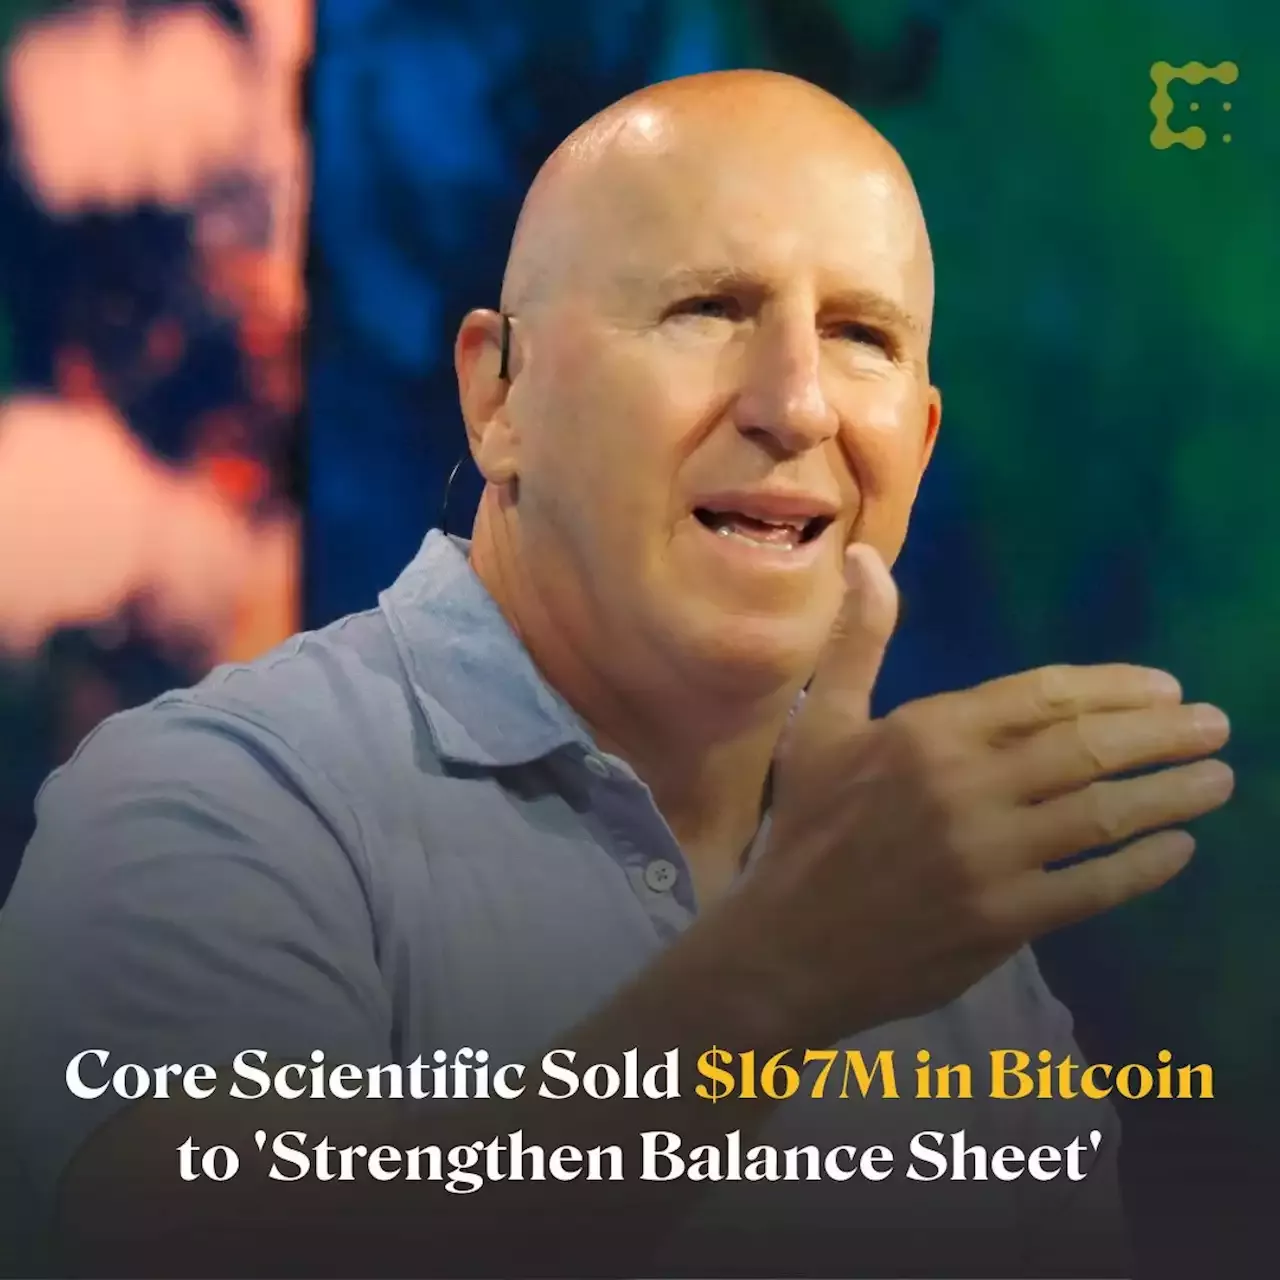 Core Scientific Sold Over 7K Bitcoins for About $167M in June, Sees More Sales